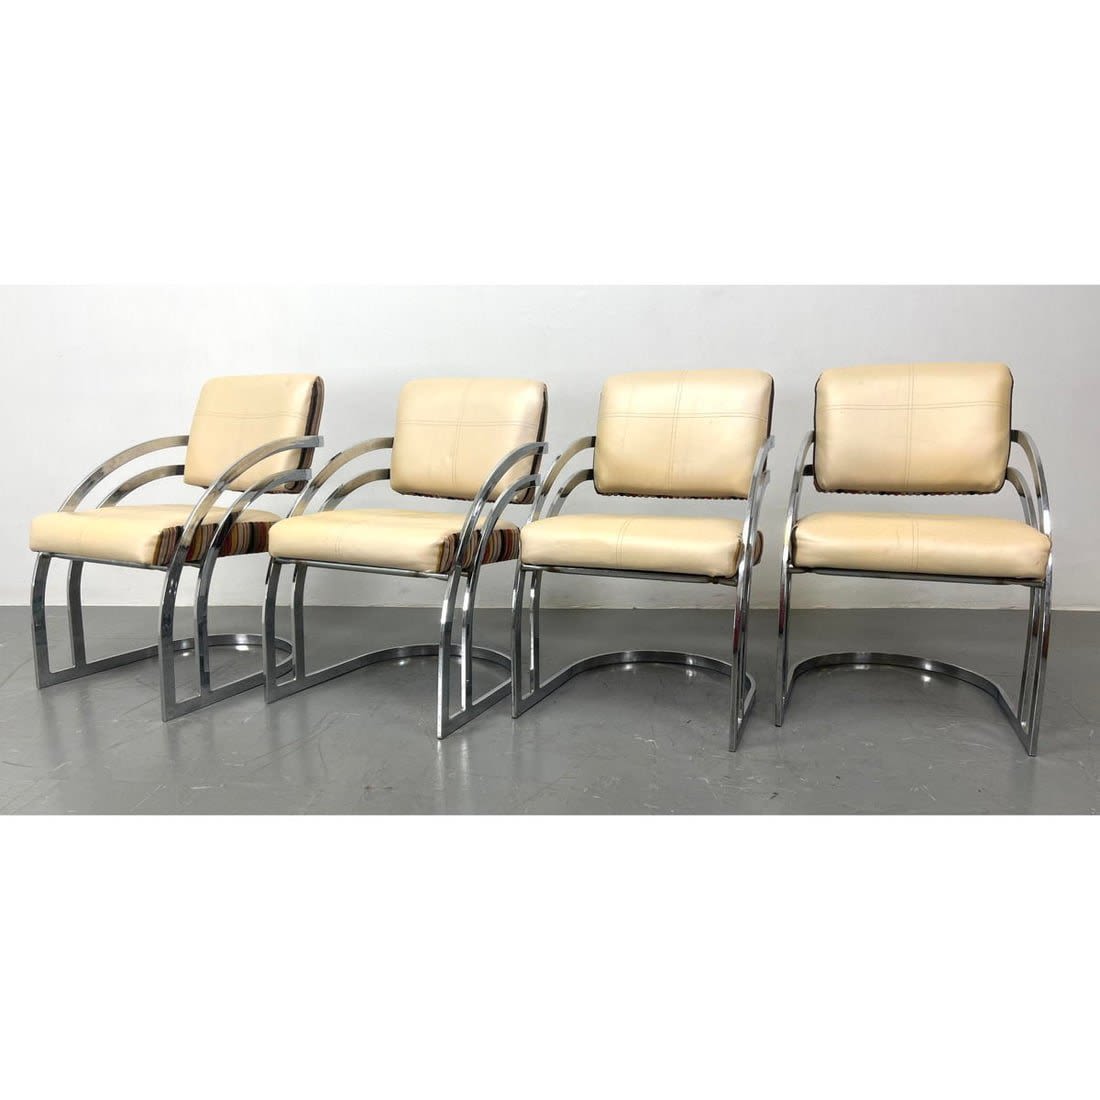 Set 4 Chrome Frame Dining Chairs.